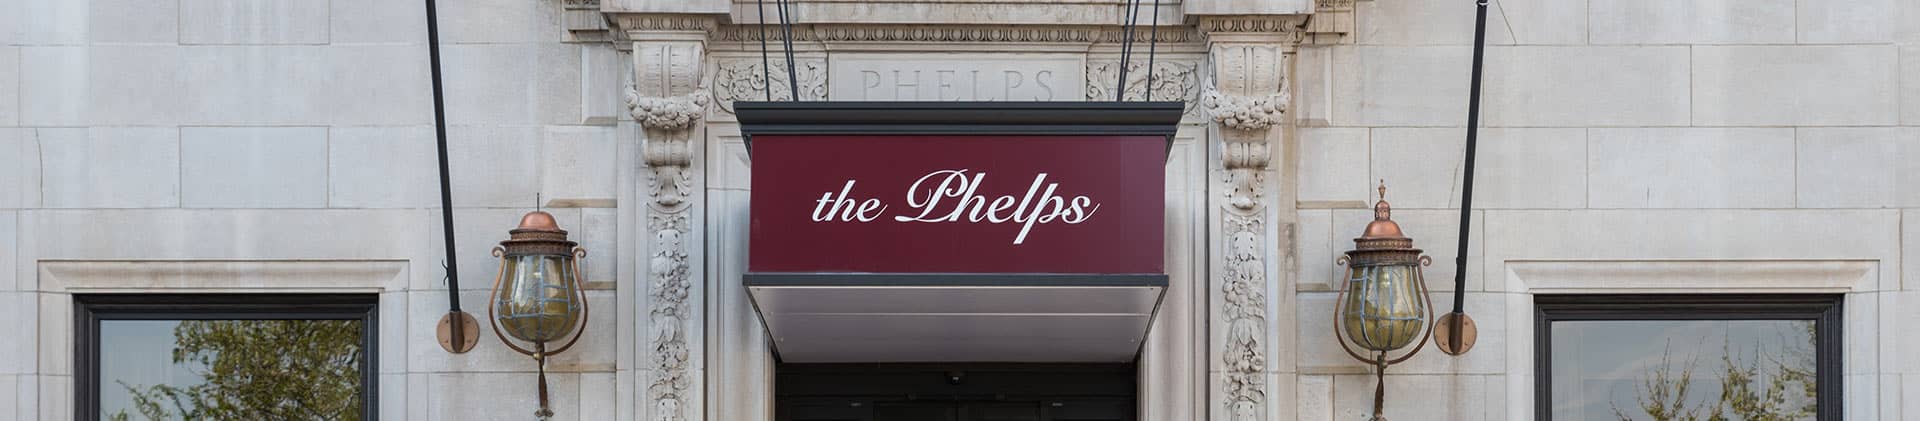 structured equity investments the phelps cincinnati downtown